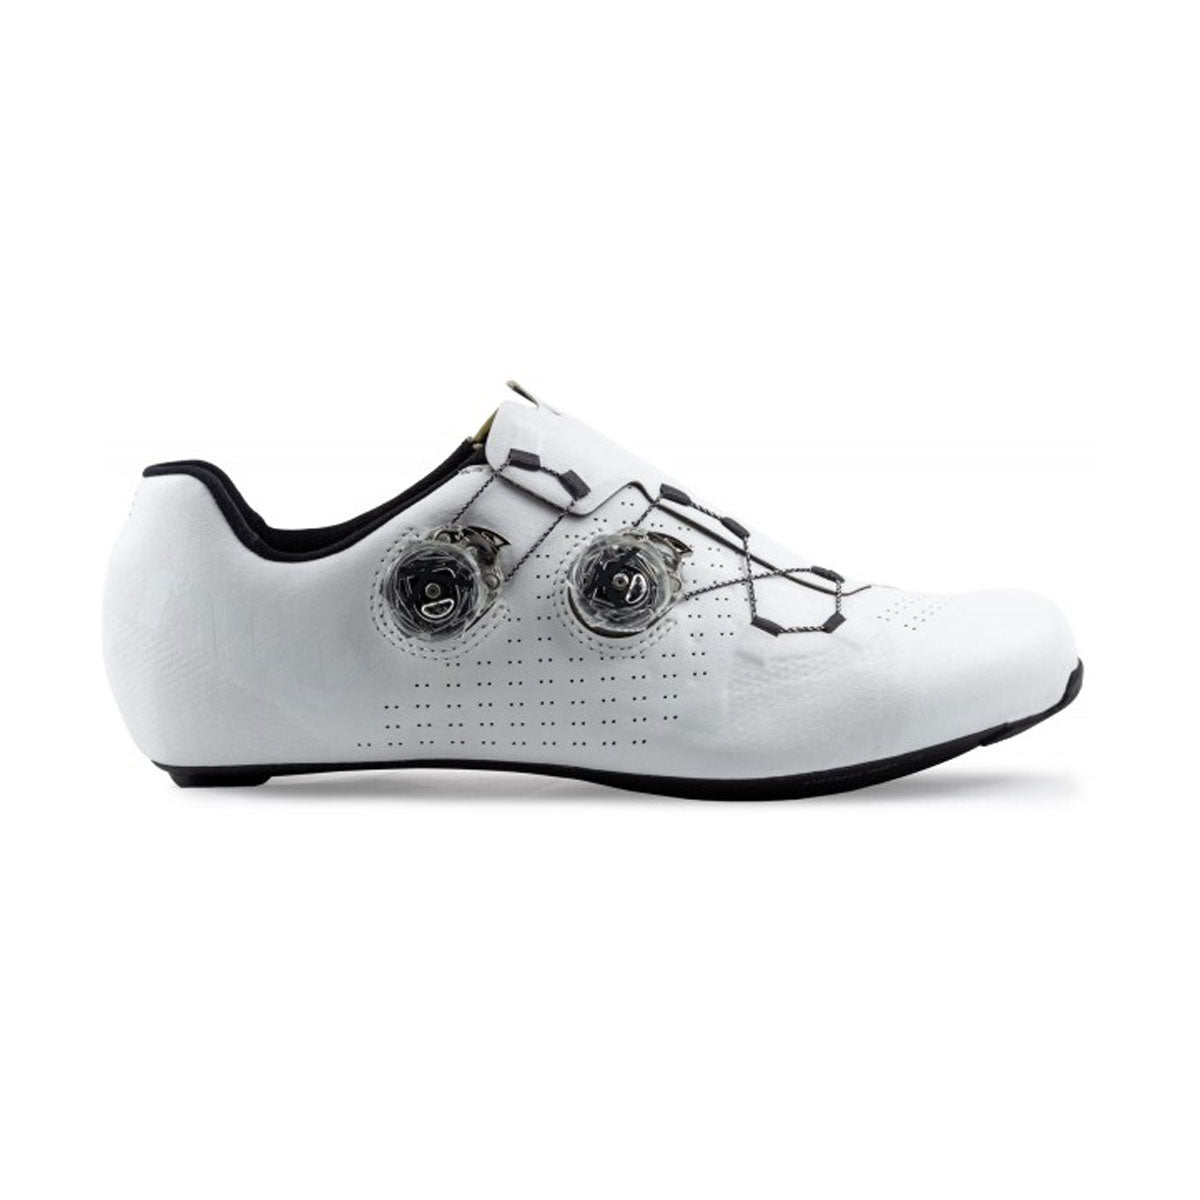 Extreme Pro 2 Road Shoes